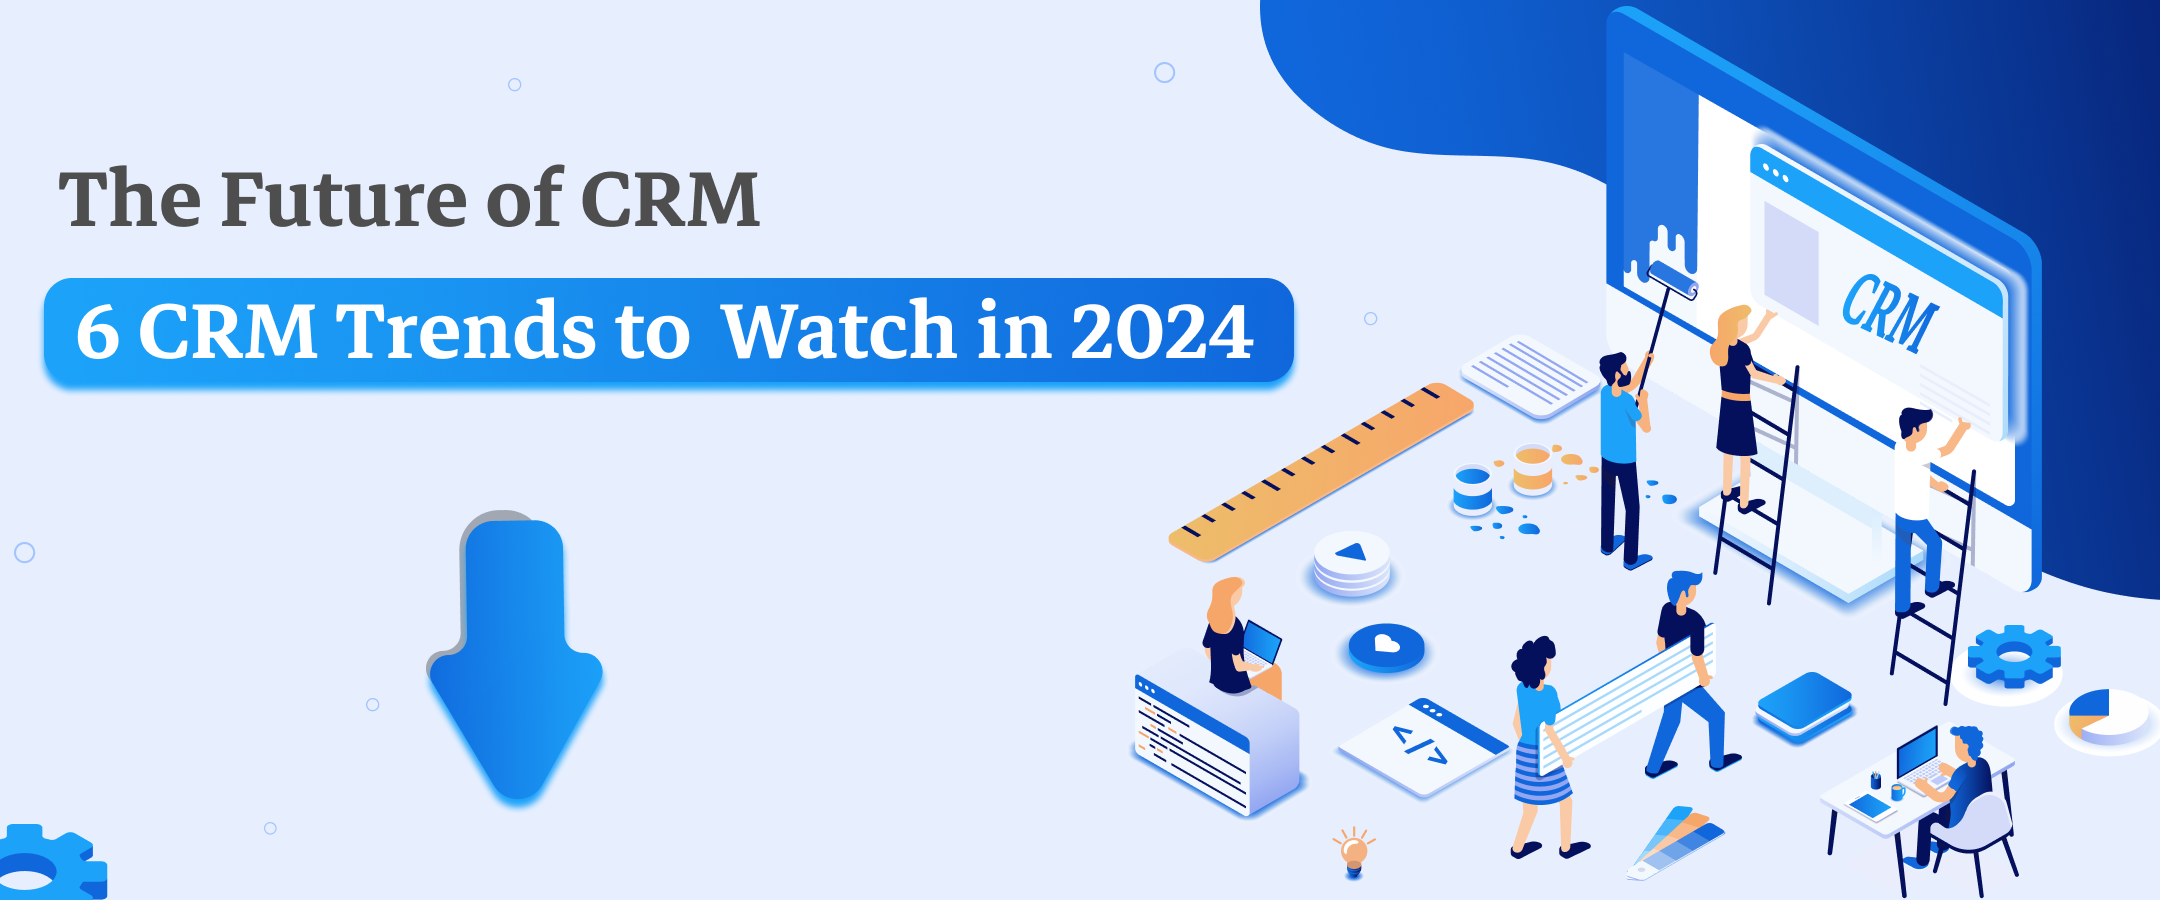 The Future of CRM: 6 CRM Trends to Watch in 2024